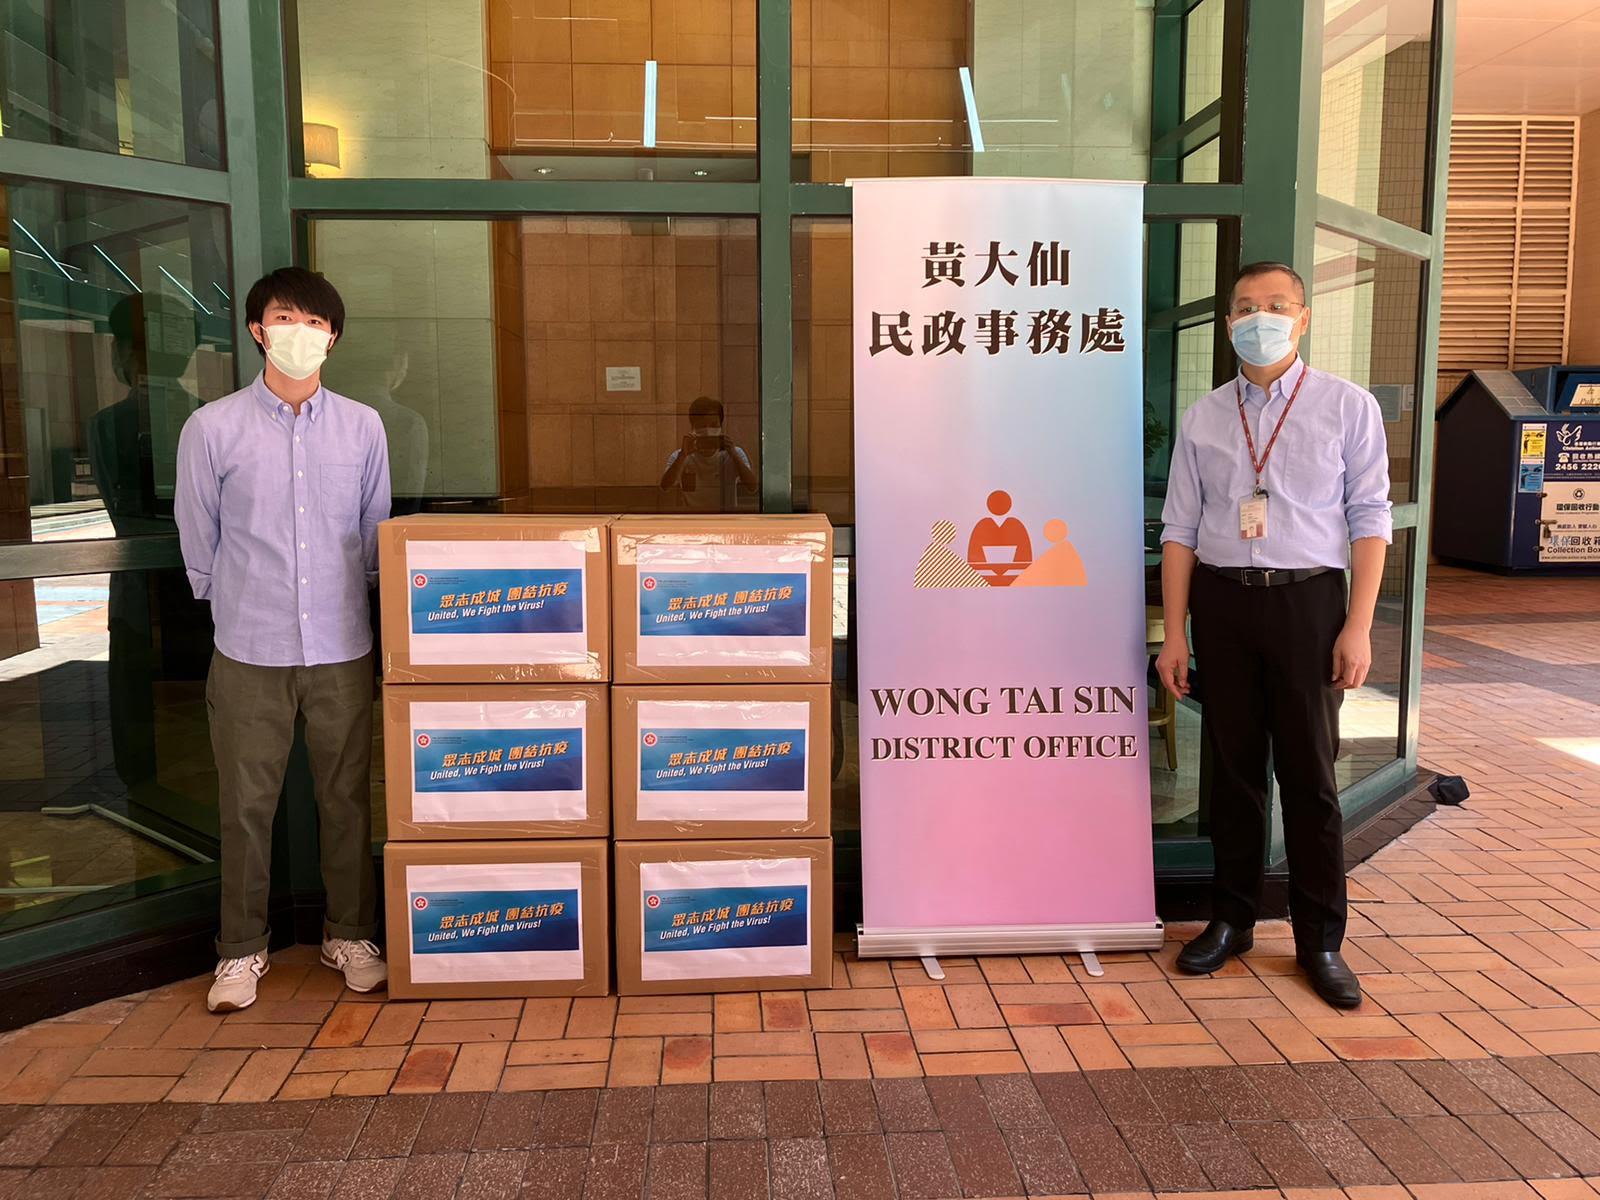 The Wong Tai Sin District Office today (July 27) distributed COVID-19 rapid test kits to households, cleansing workers and property management staff living and working in Galaxia for voluntary testing through the property management company.

